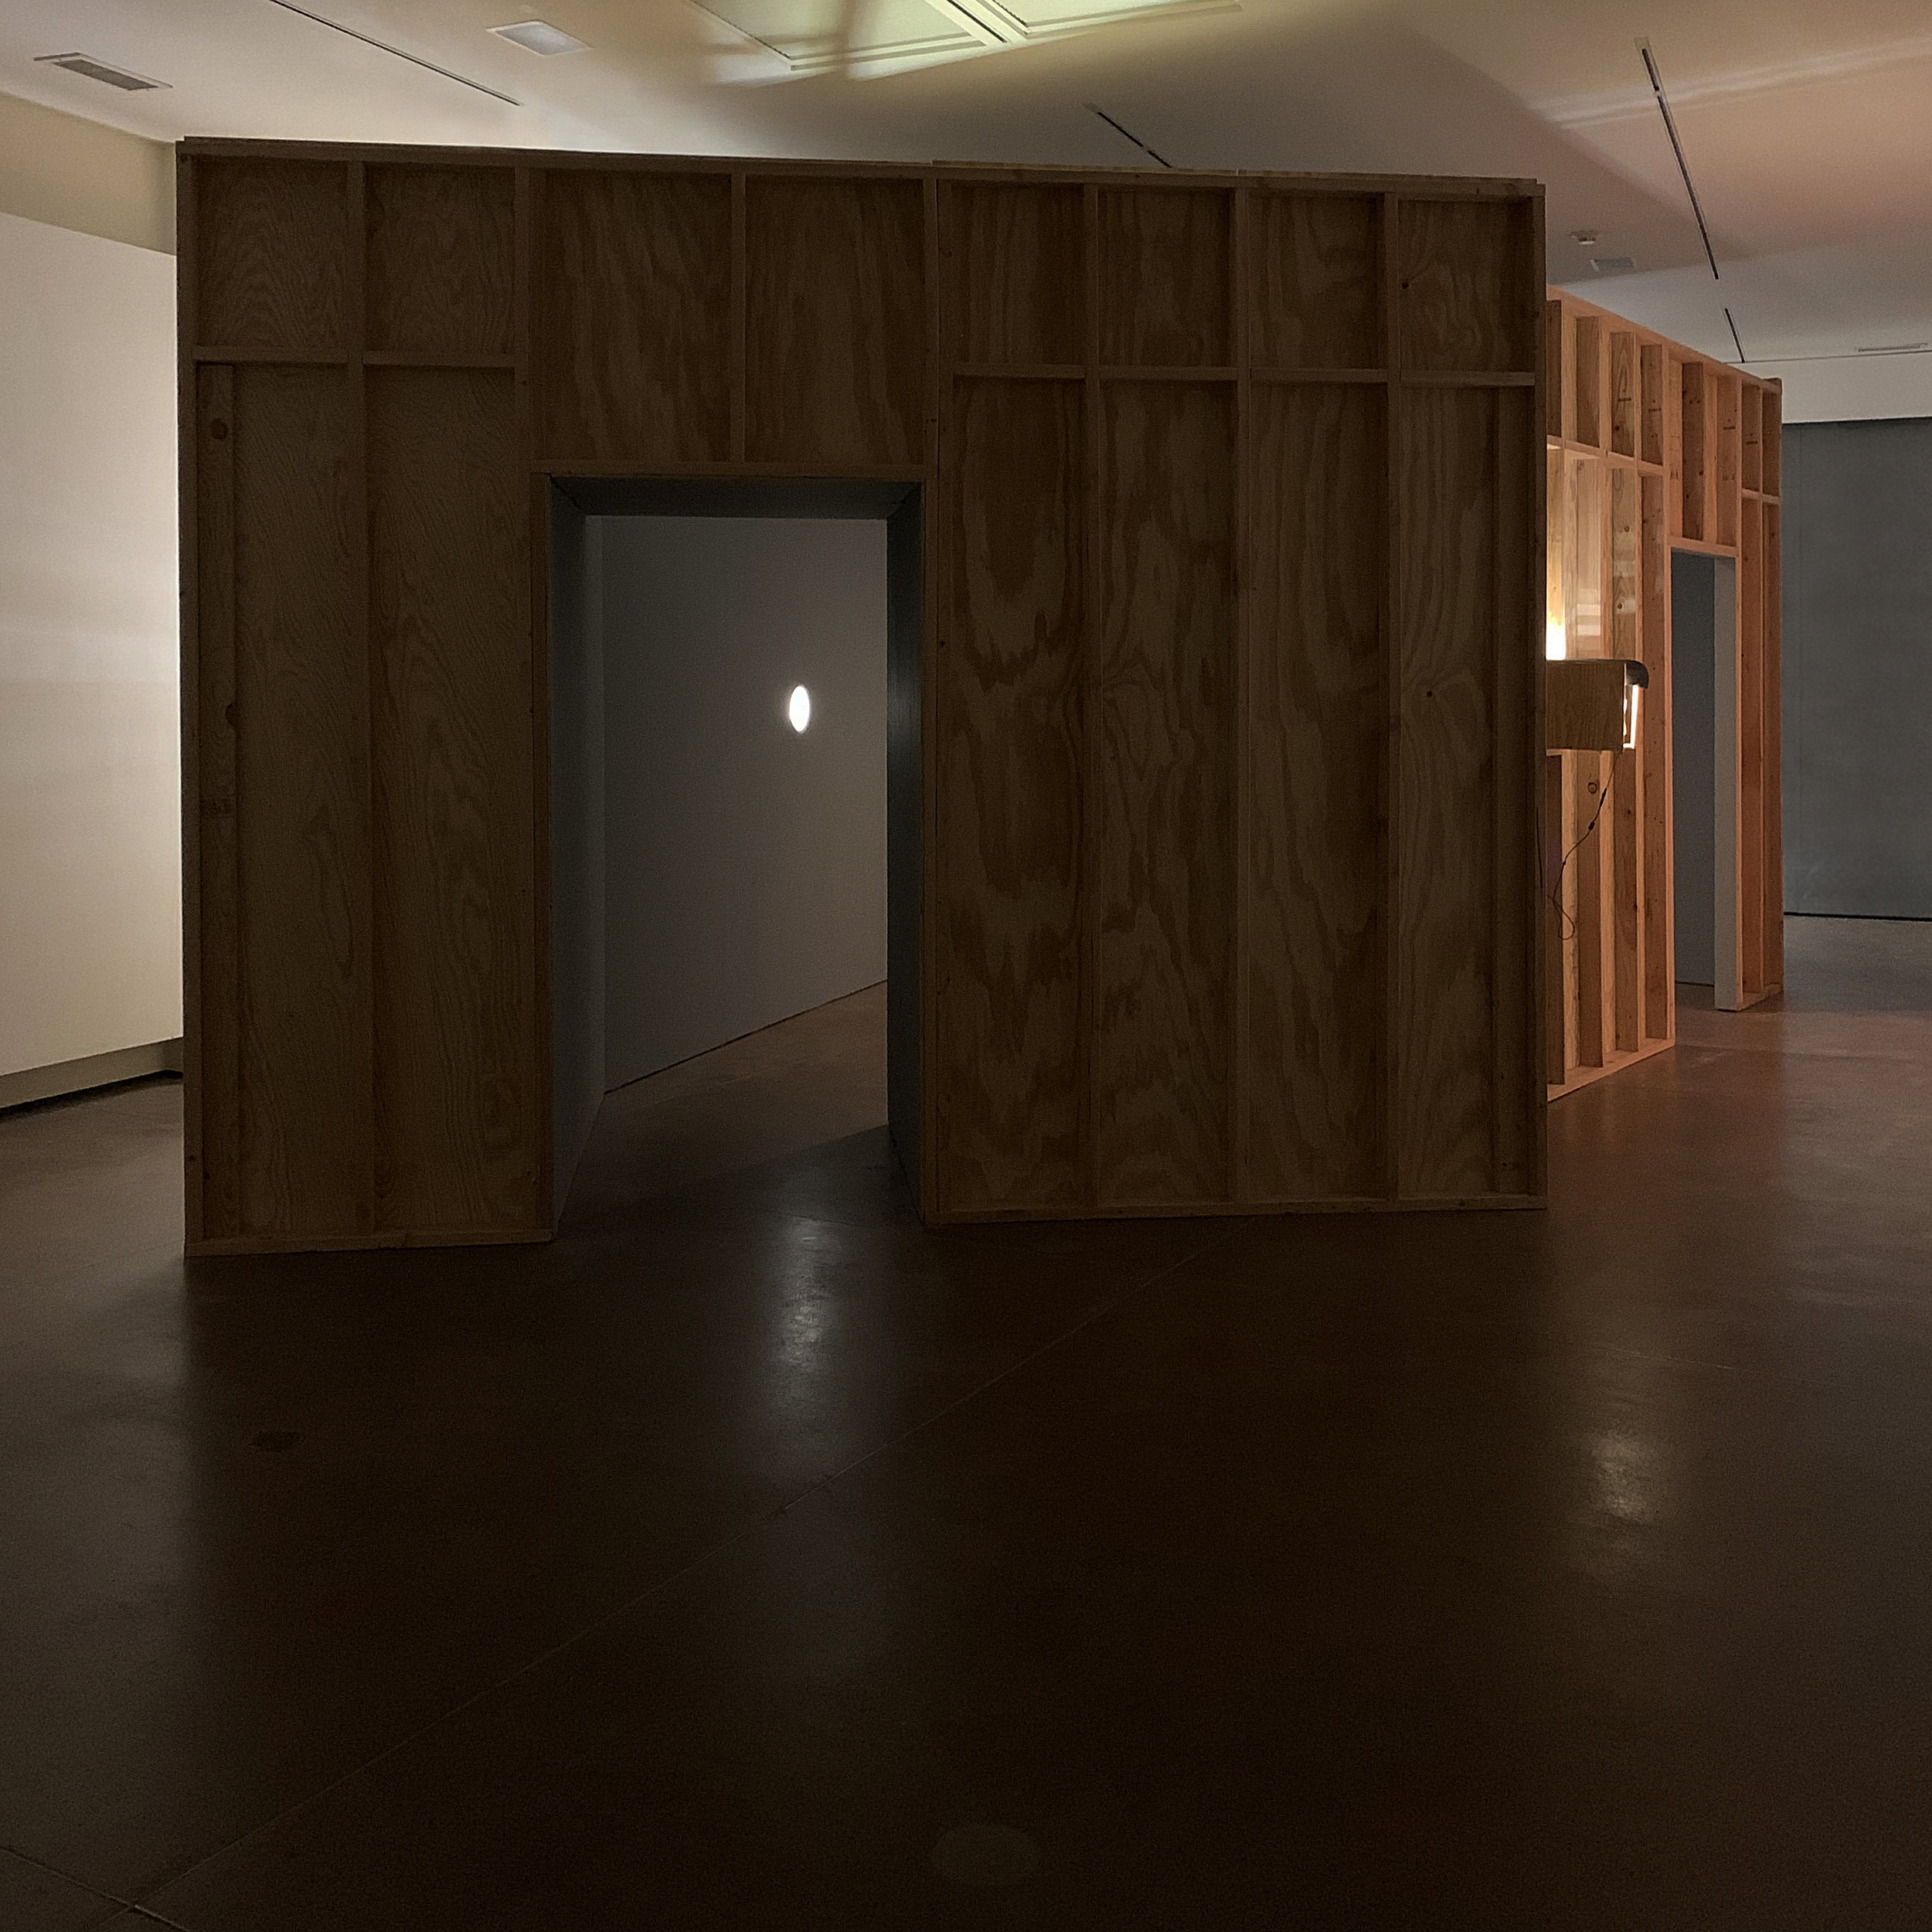 Installation View: Room of Nocturnes